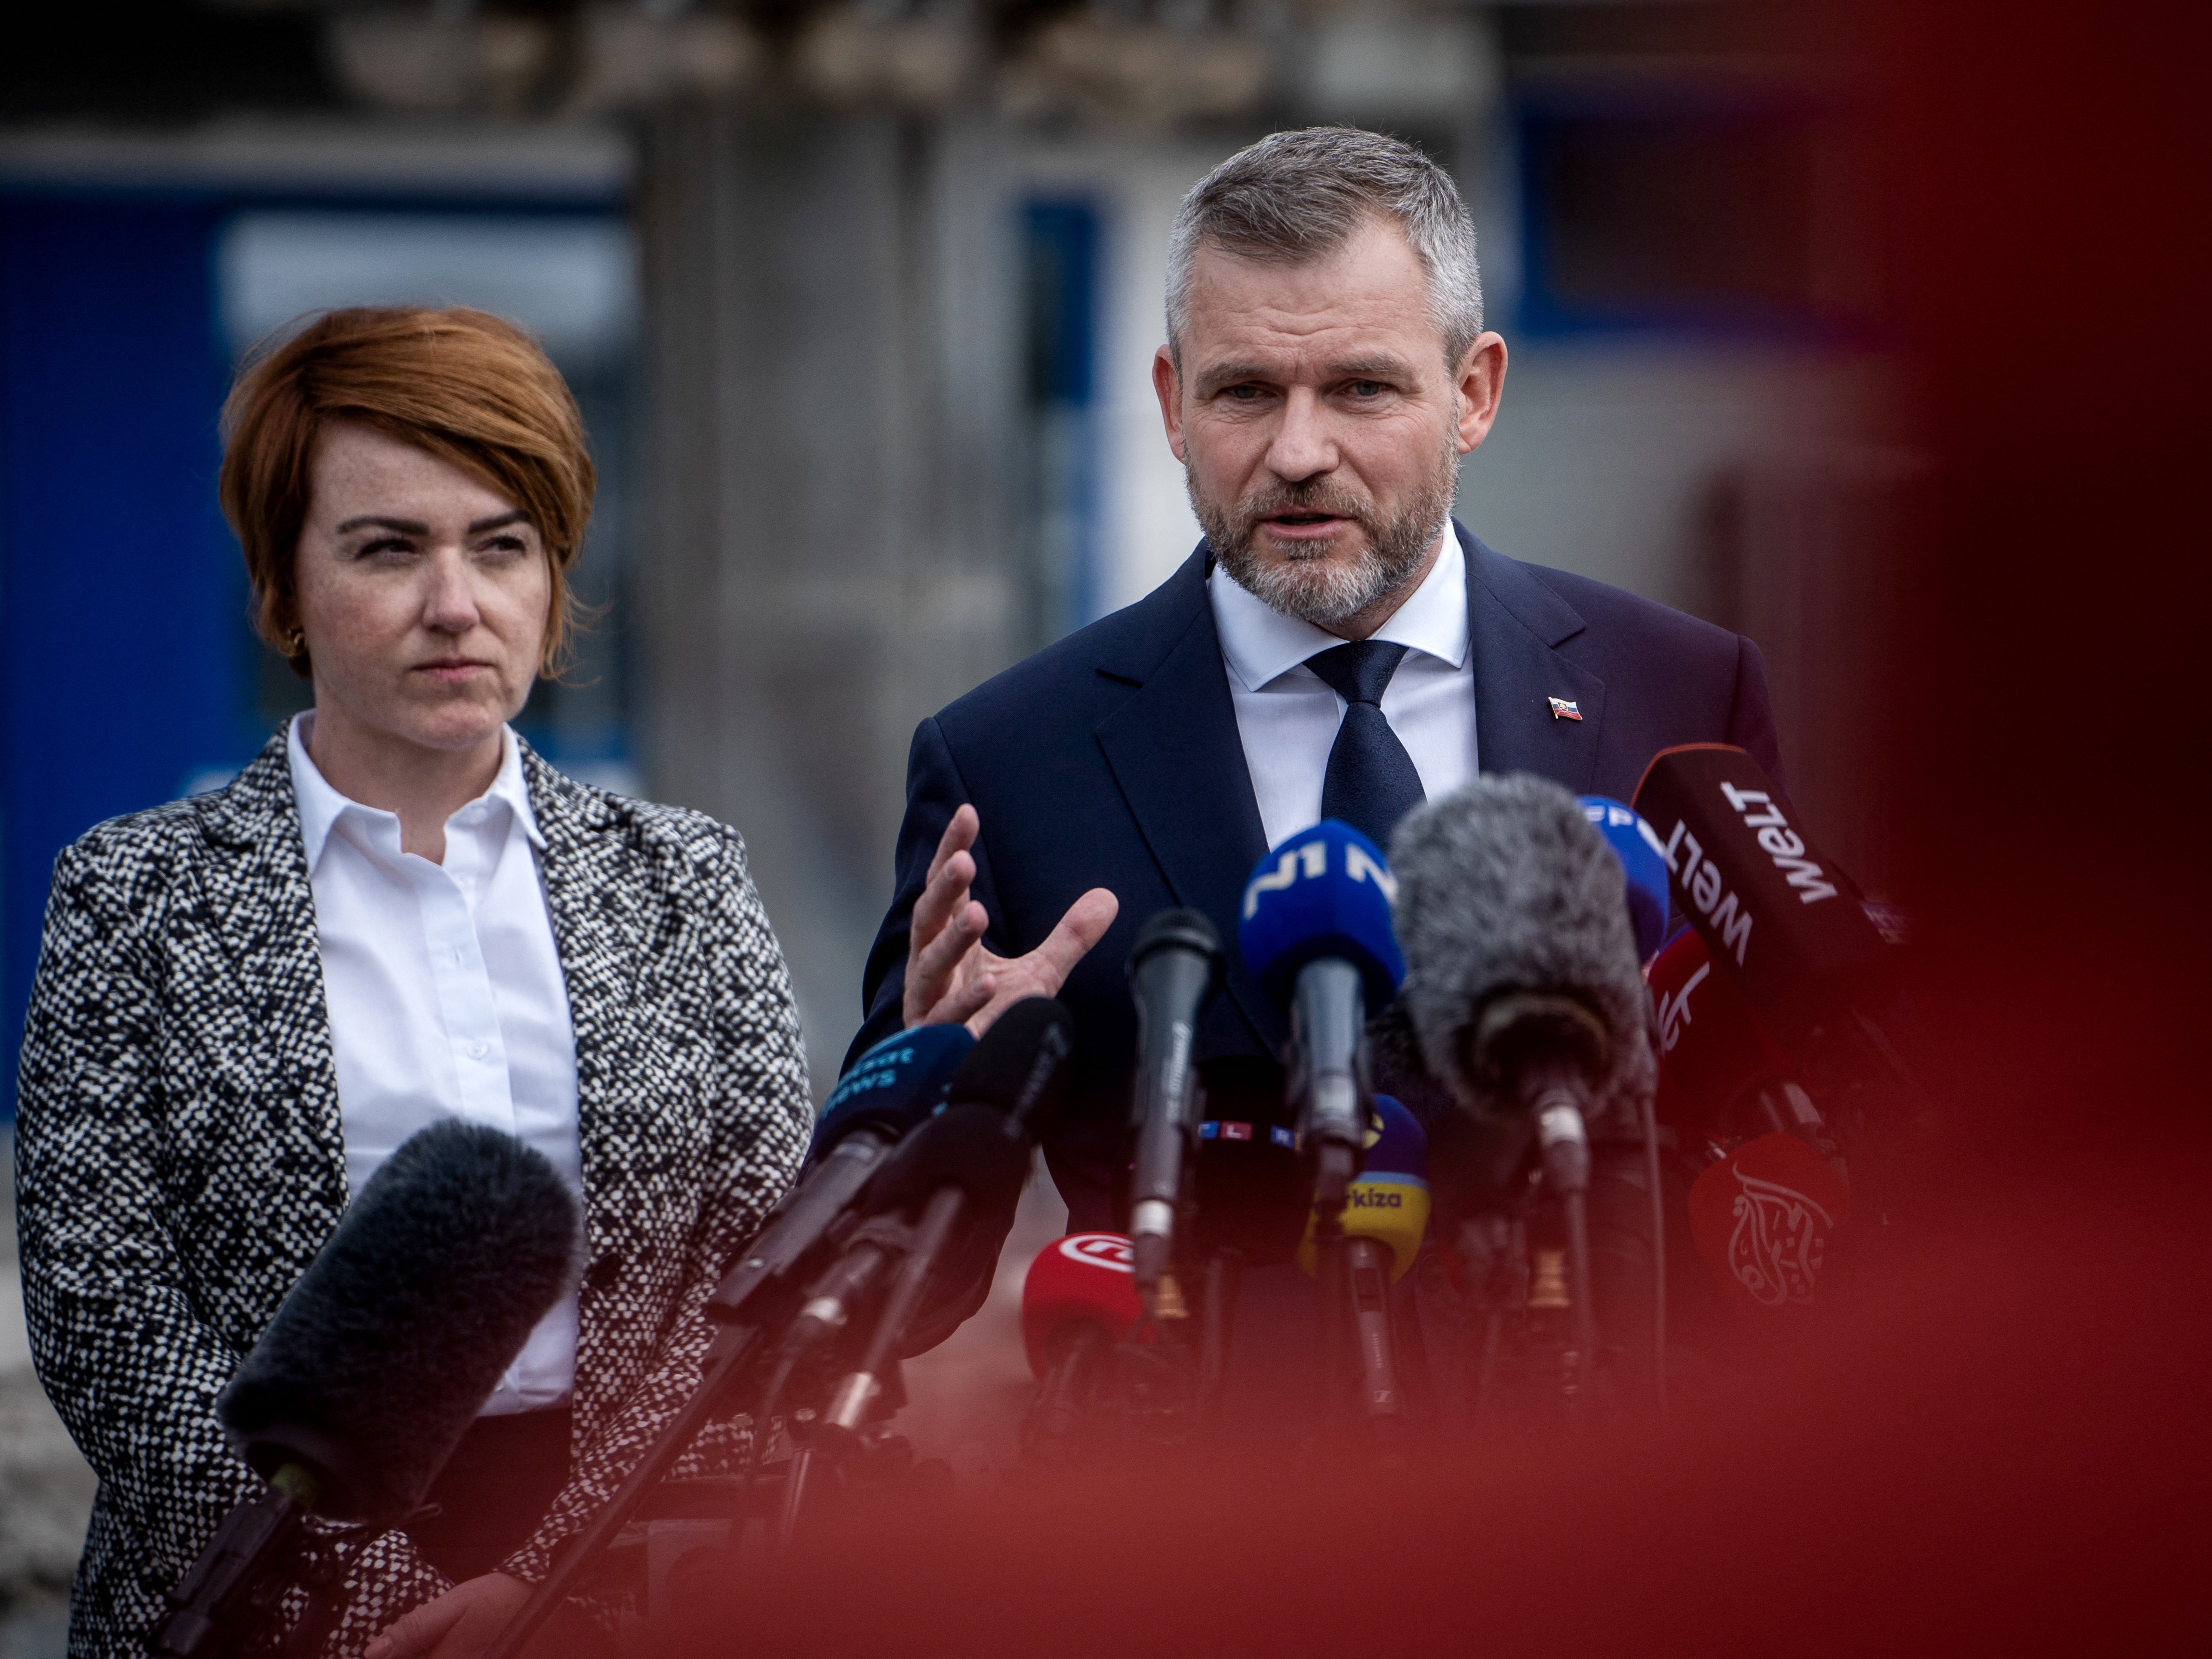 Slovakia’s president-elect Peter Pellegrini speaks to reporters on Thursday to try and calm tensions